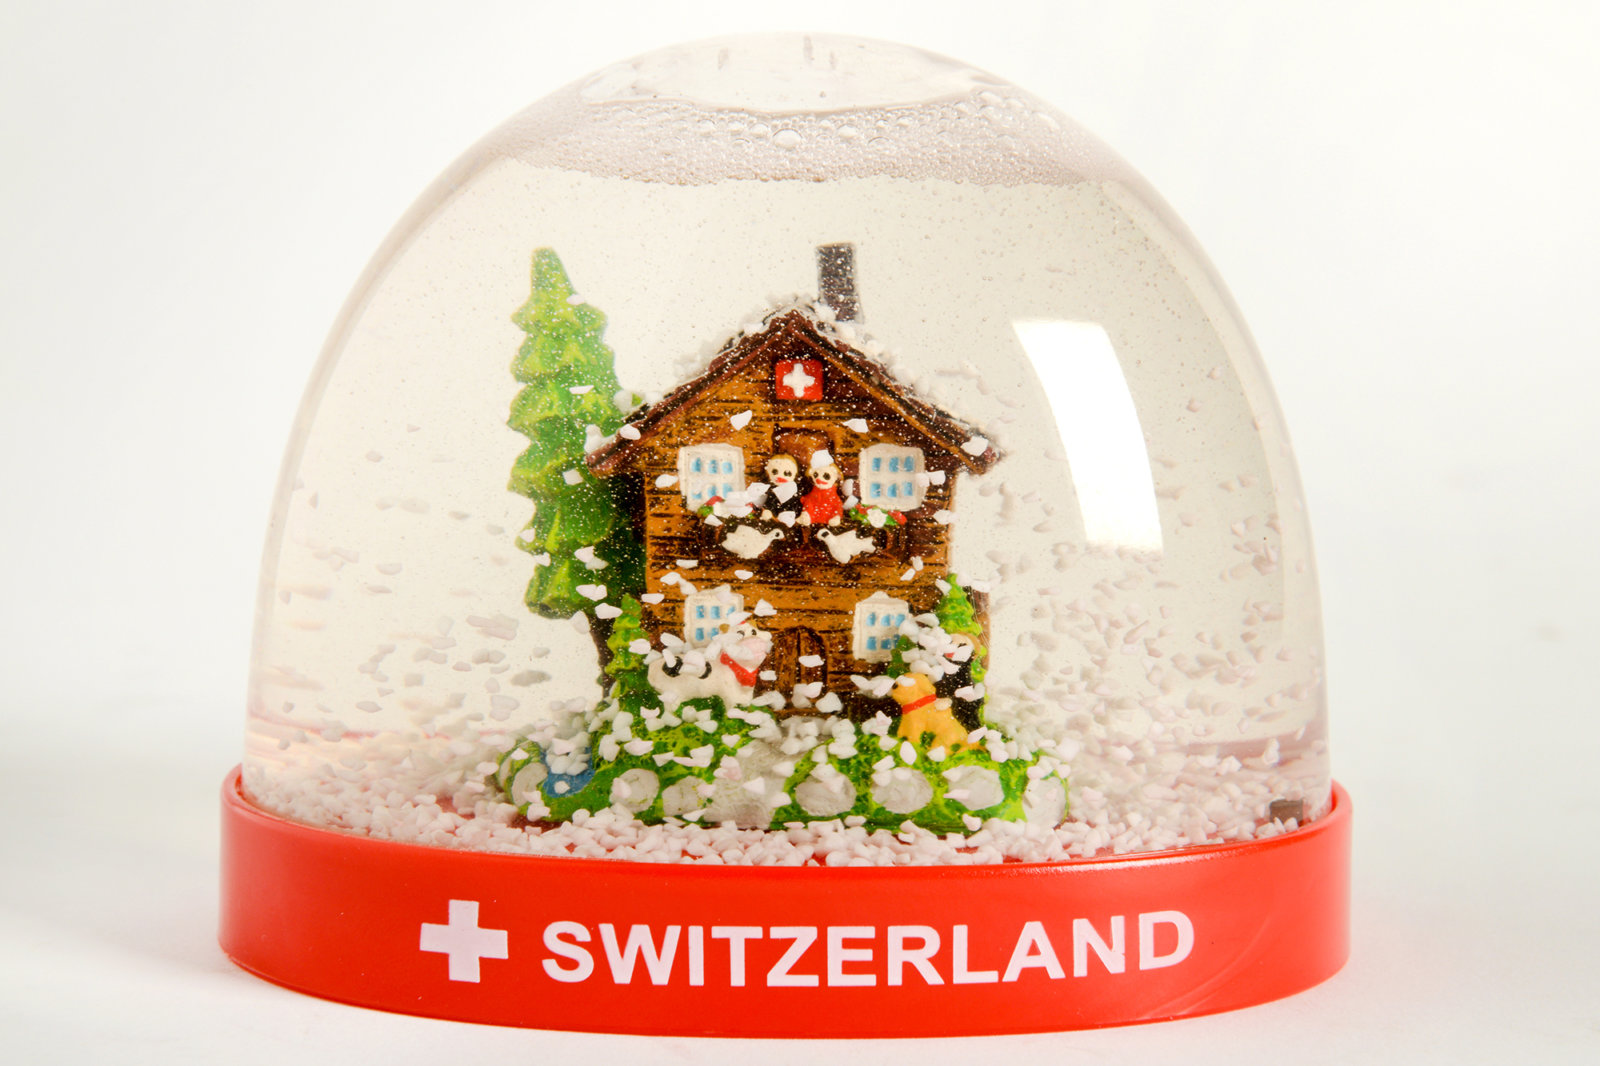 Famous Quotes About Switzerland, Snow Globe of Switzerland, what are quotes about switzerland